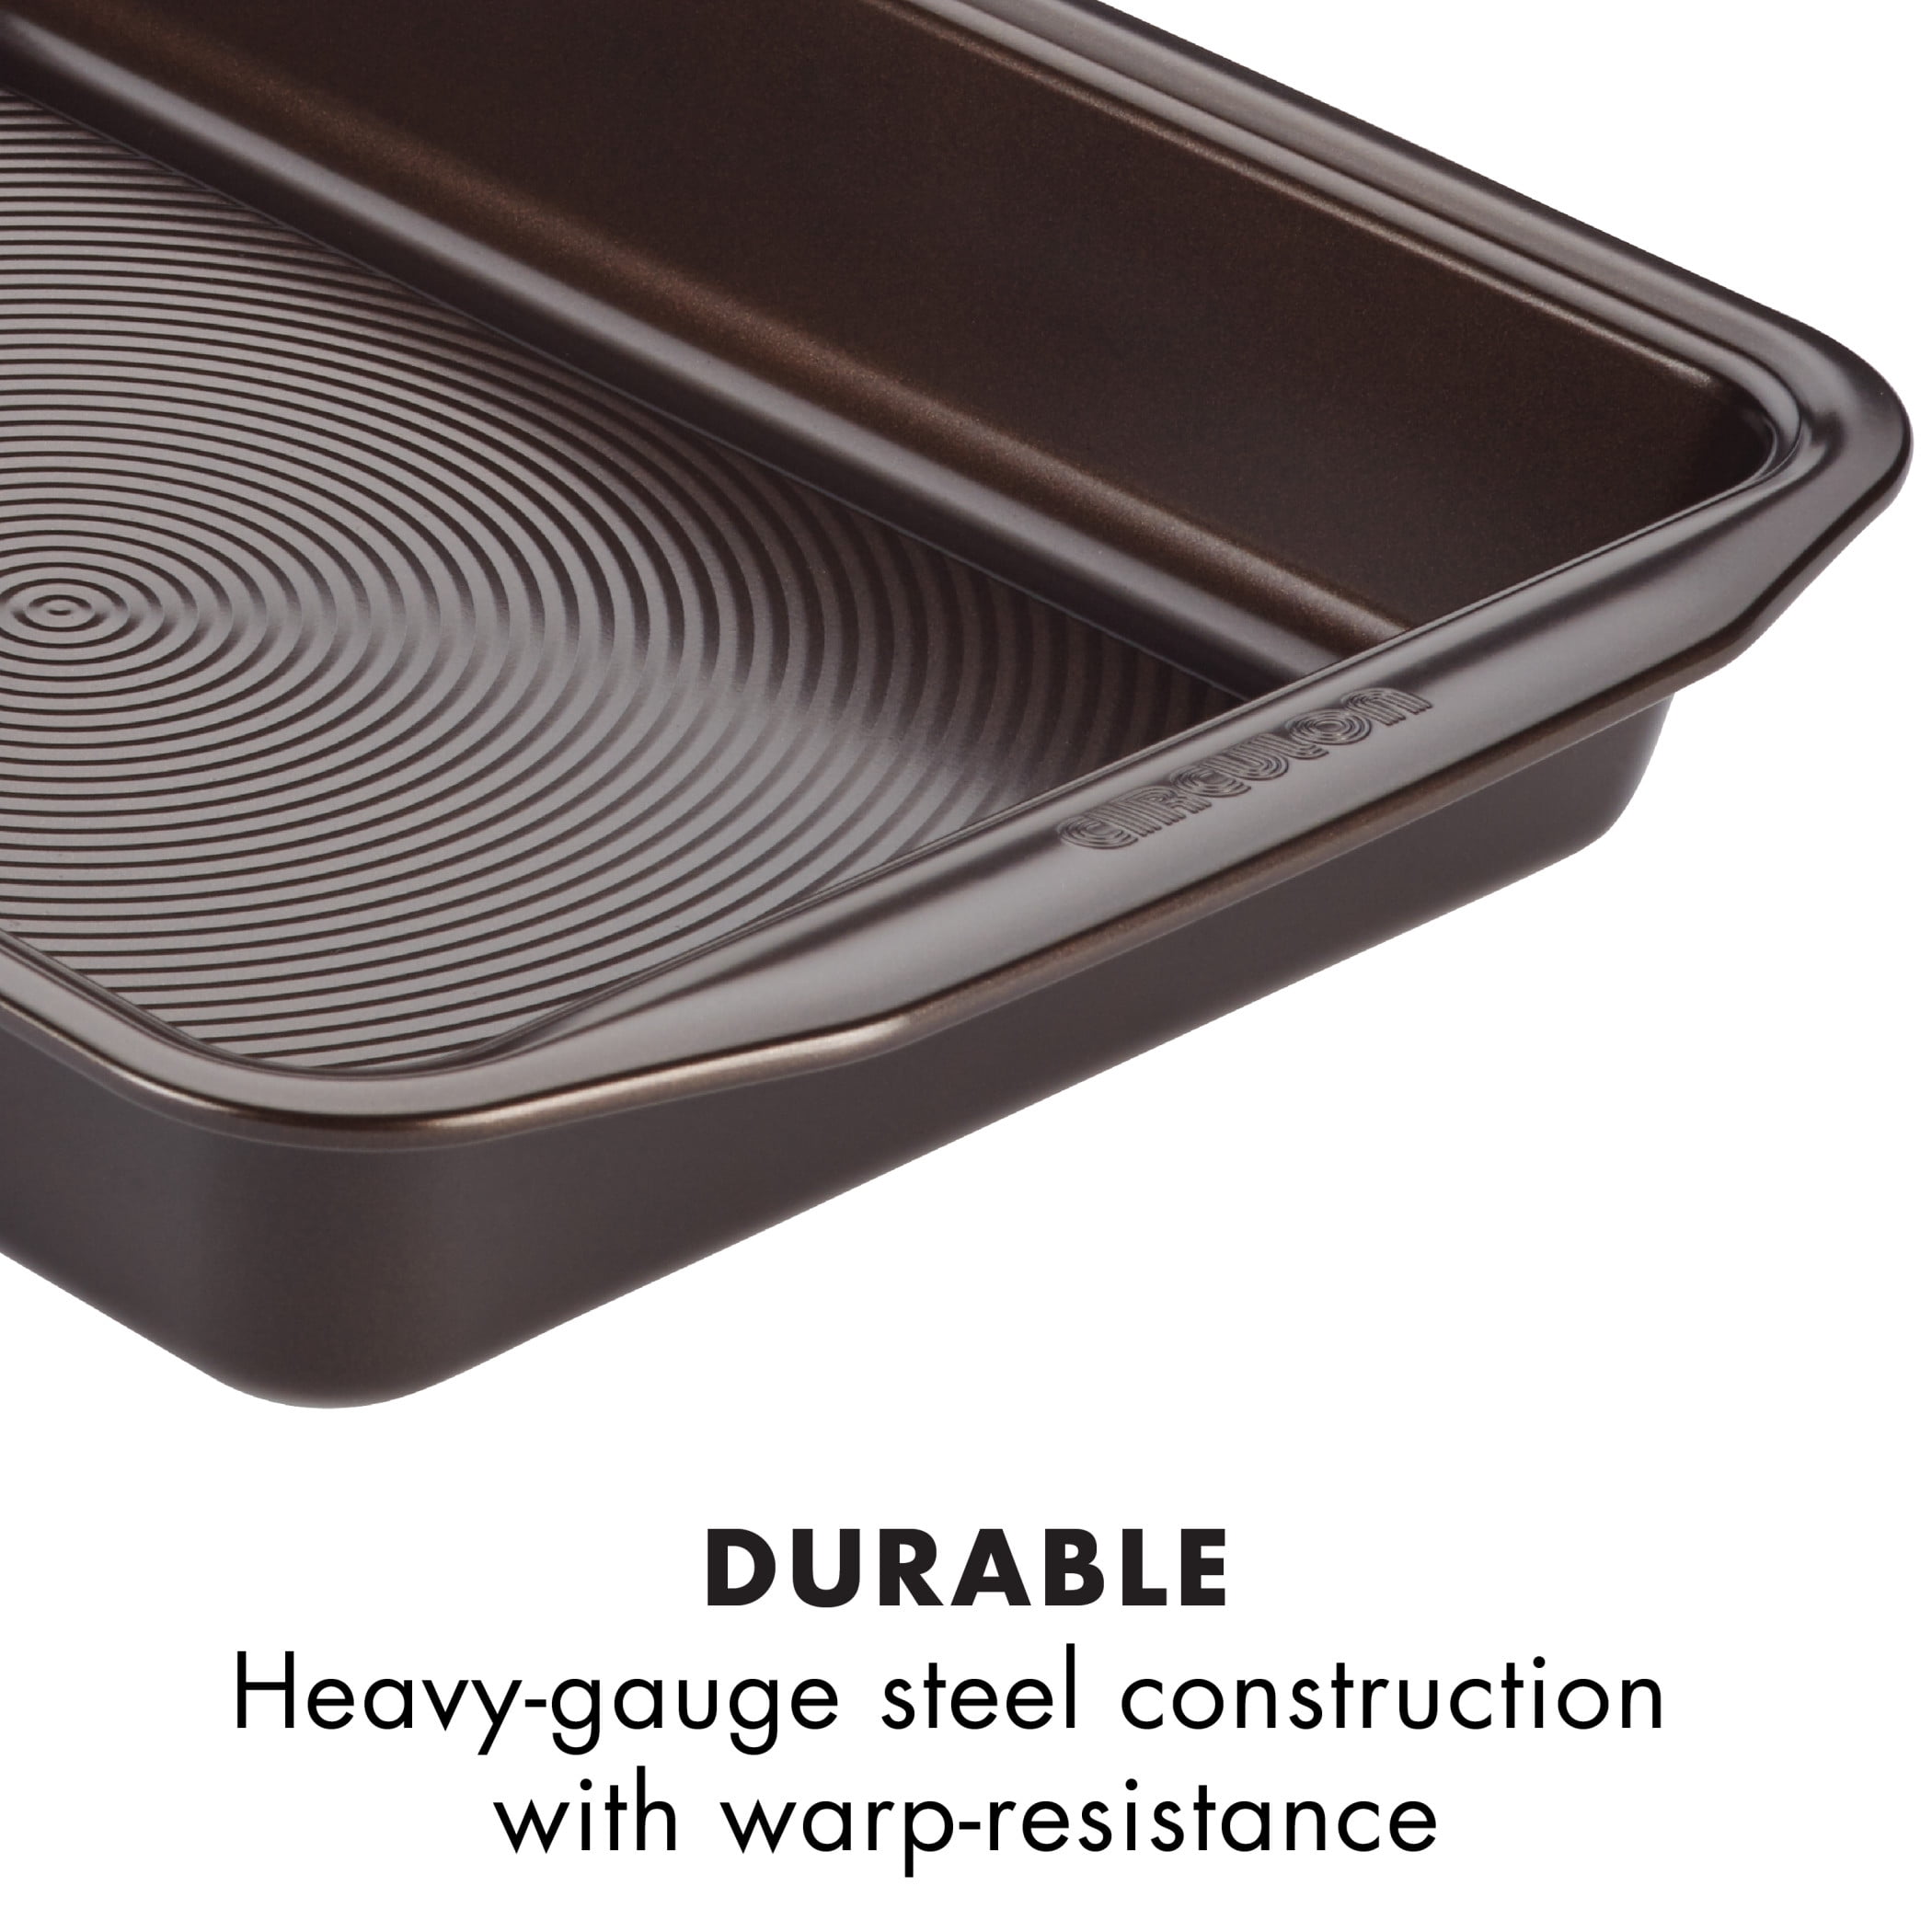  Circulon Nonstick Bakeware Set with Nonstick Cookie Sheet / Baking  Sheet and Cooling Rack - 2 Piece, Chocolate Brown: Home & Kitchen